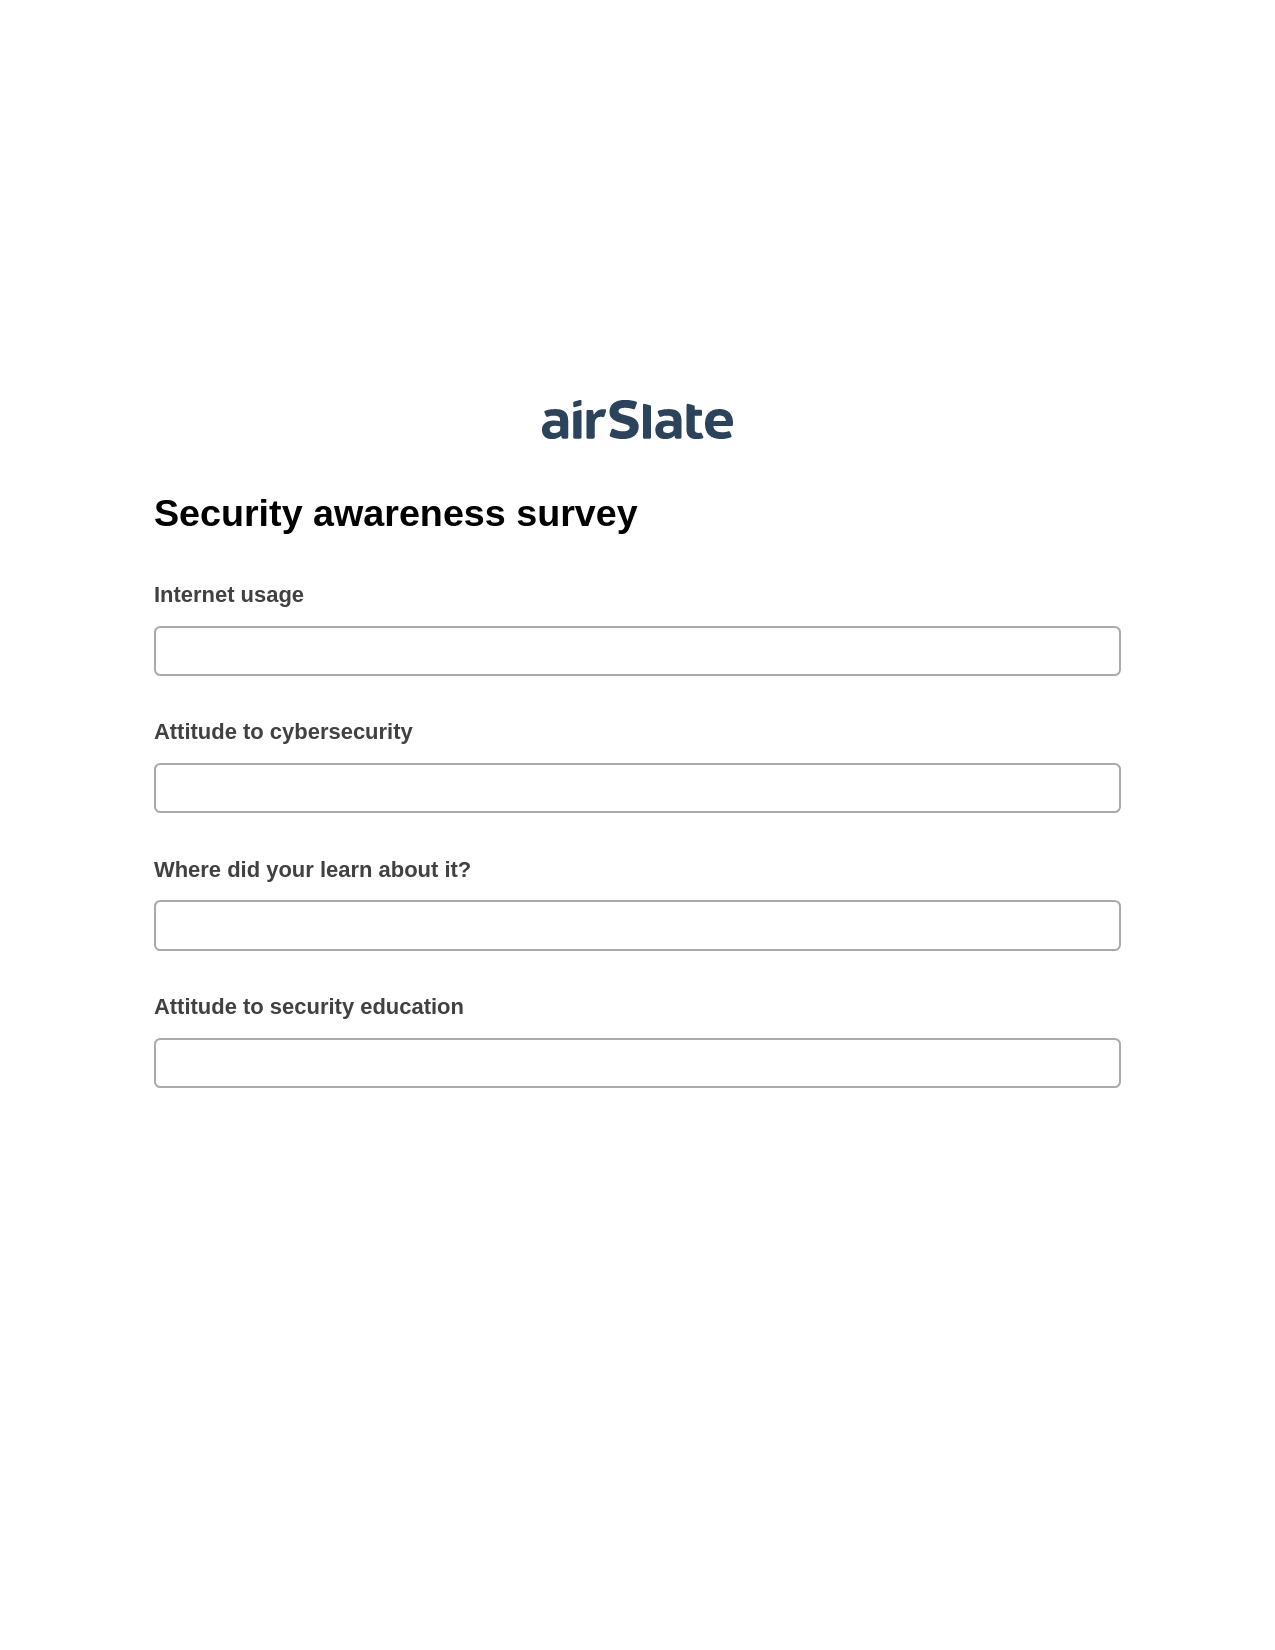 Security awareness survey Pre-fill from another Slate Bot, Open as Role Bot, Export to Salesforce Bot